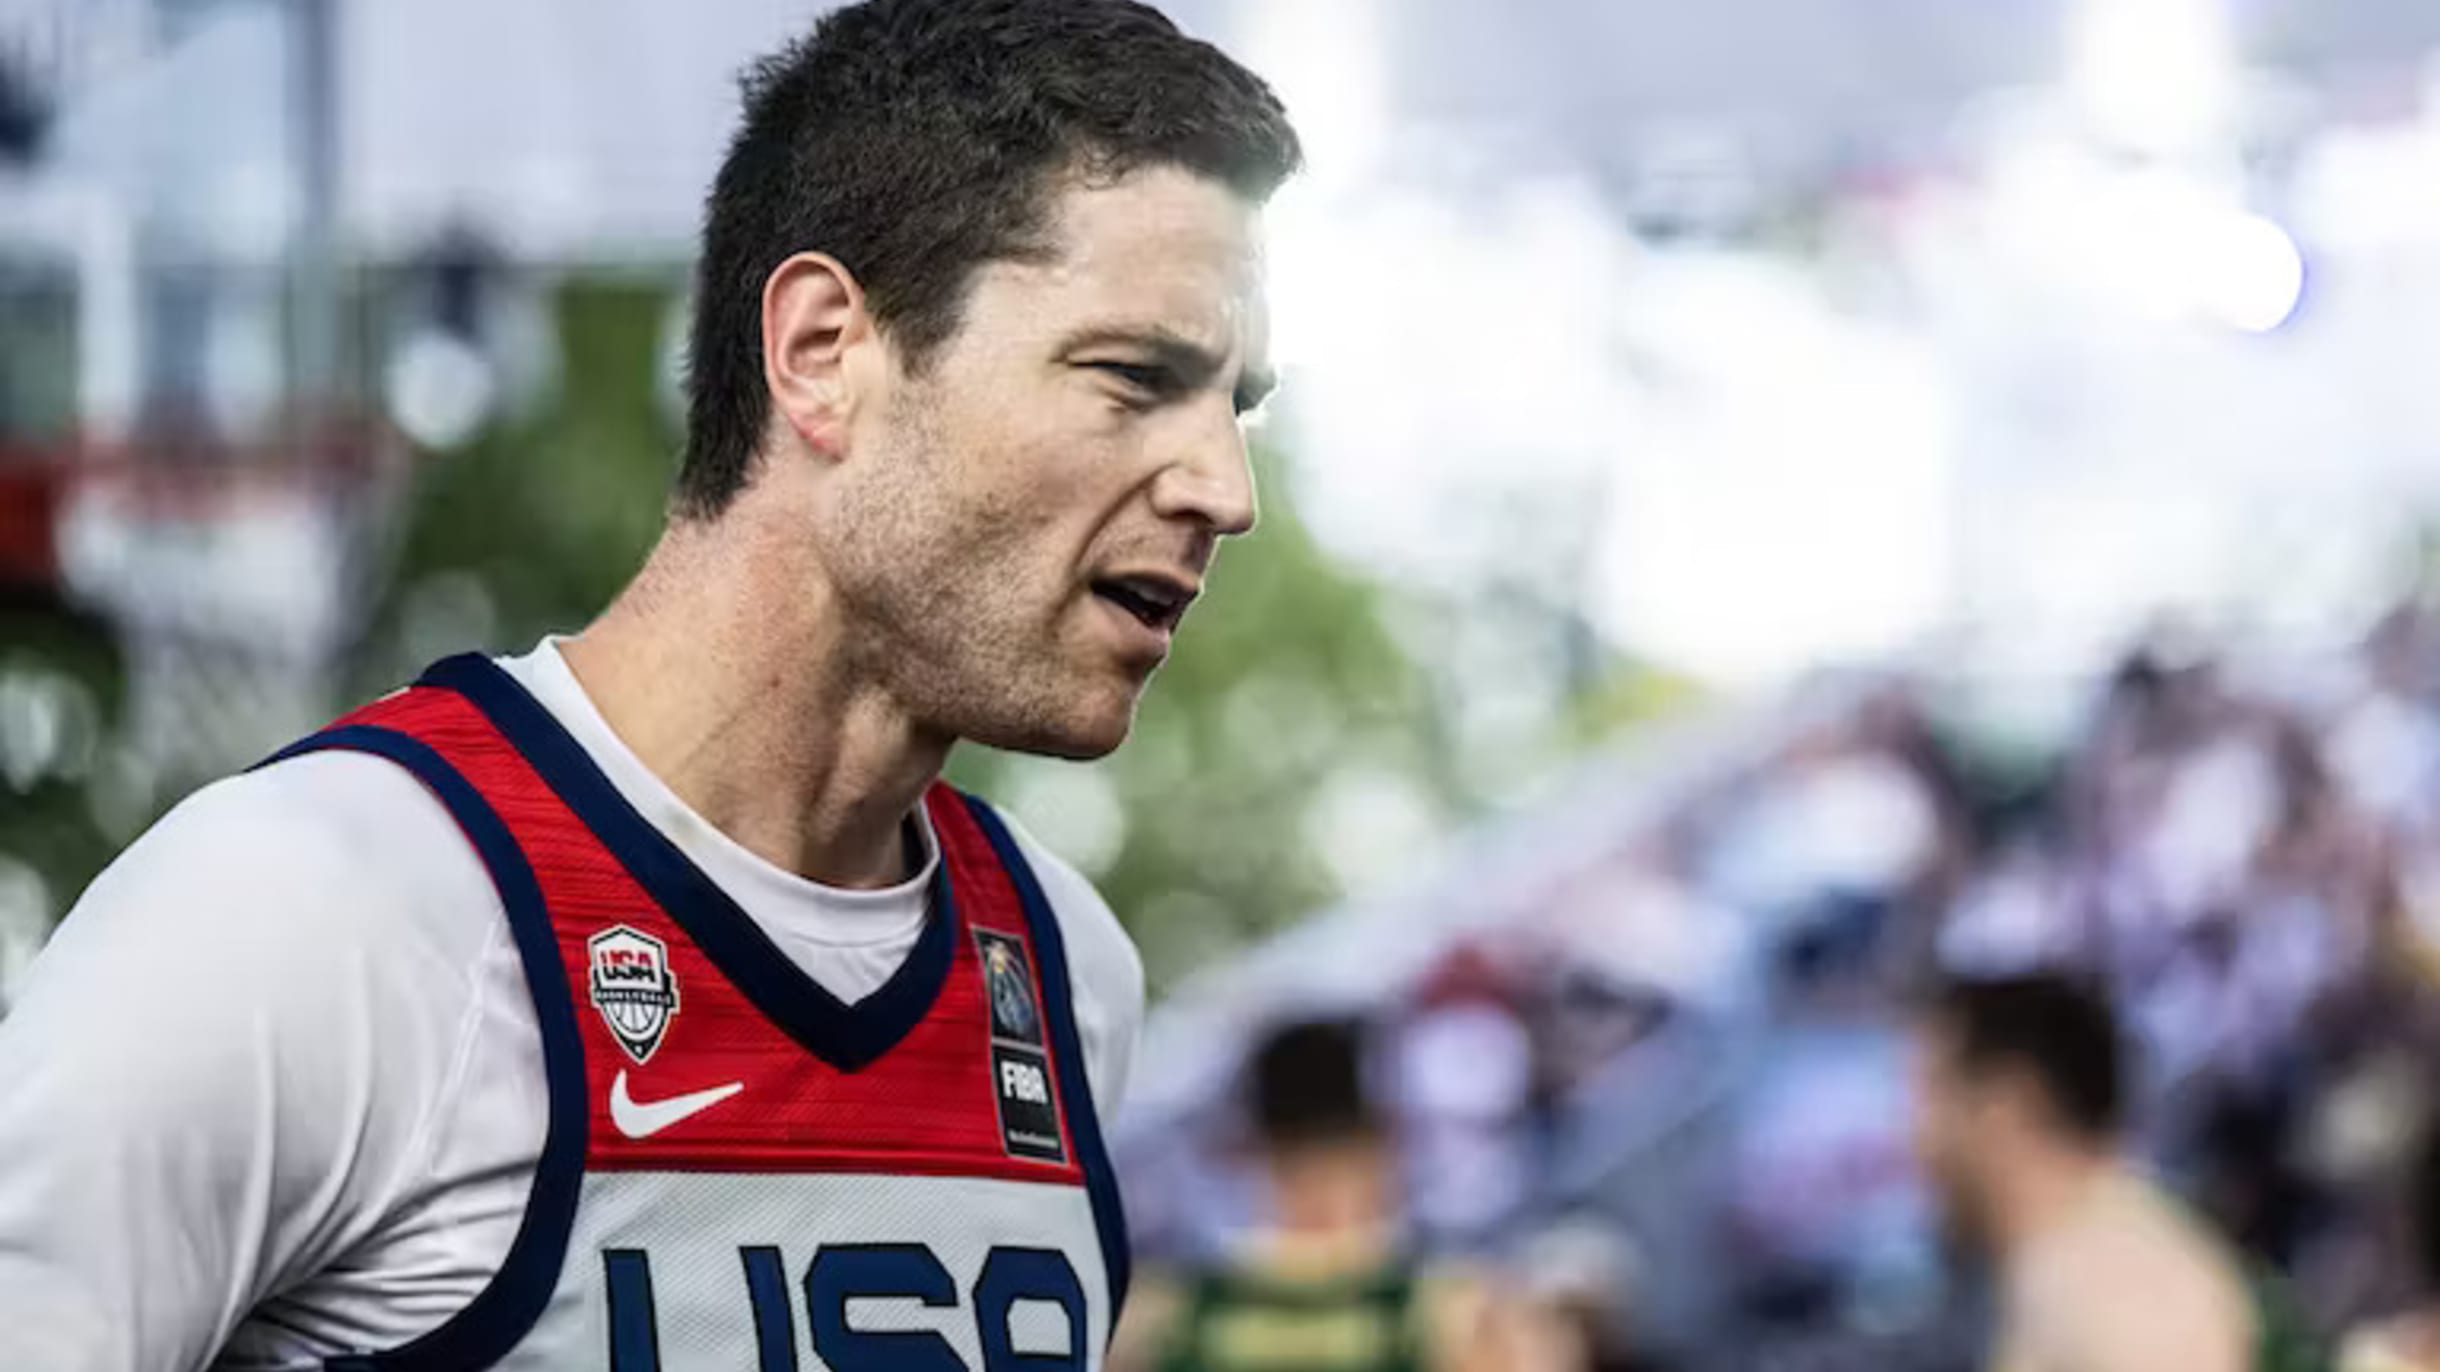 The faces of Jimmer: Fredette dons disguise, talks about family, future and  possible 2024 Olympic run